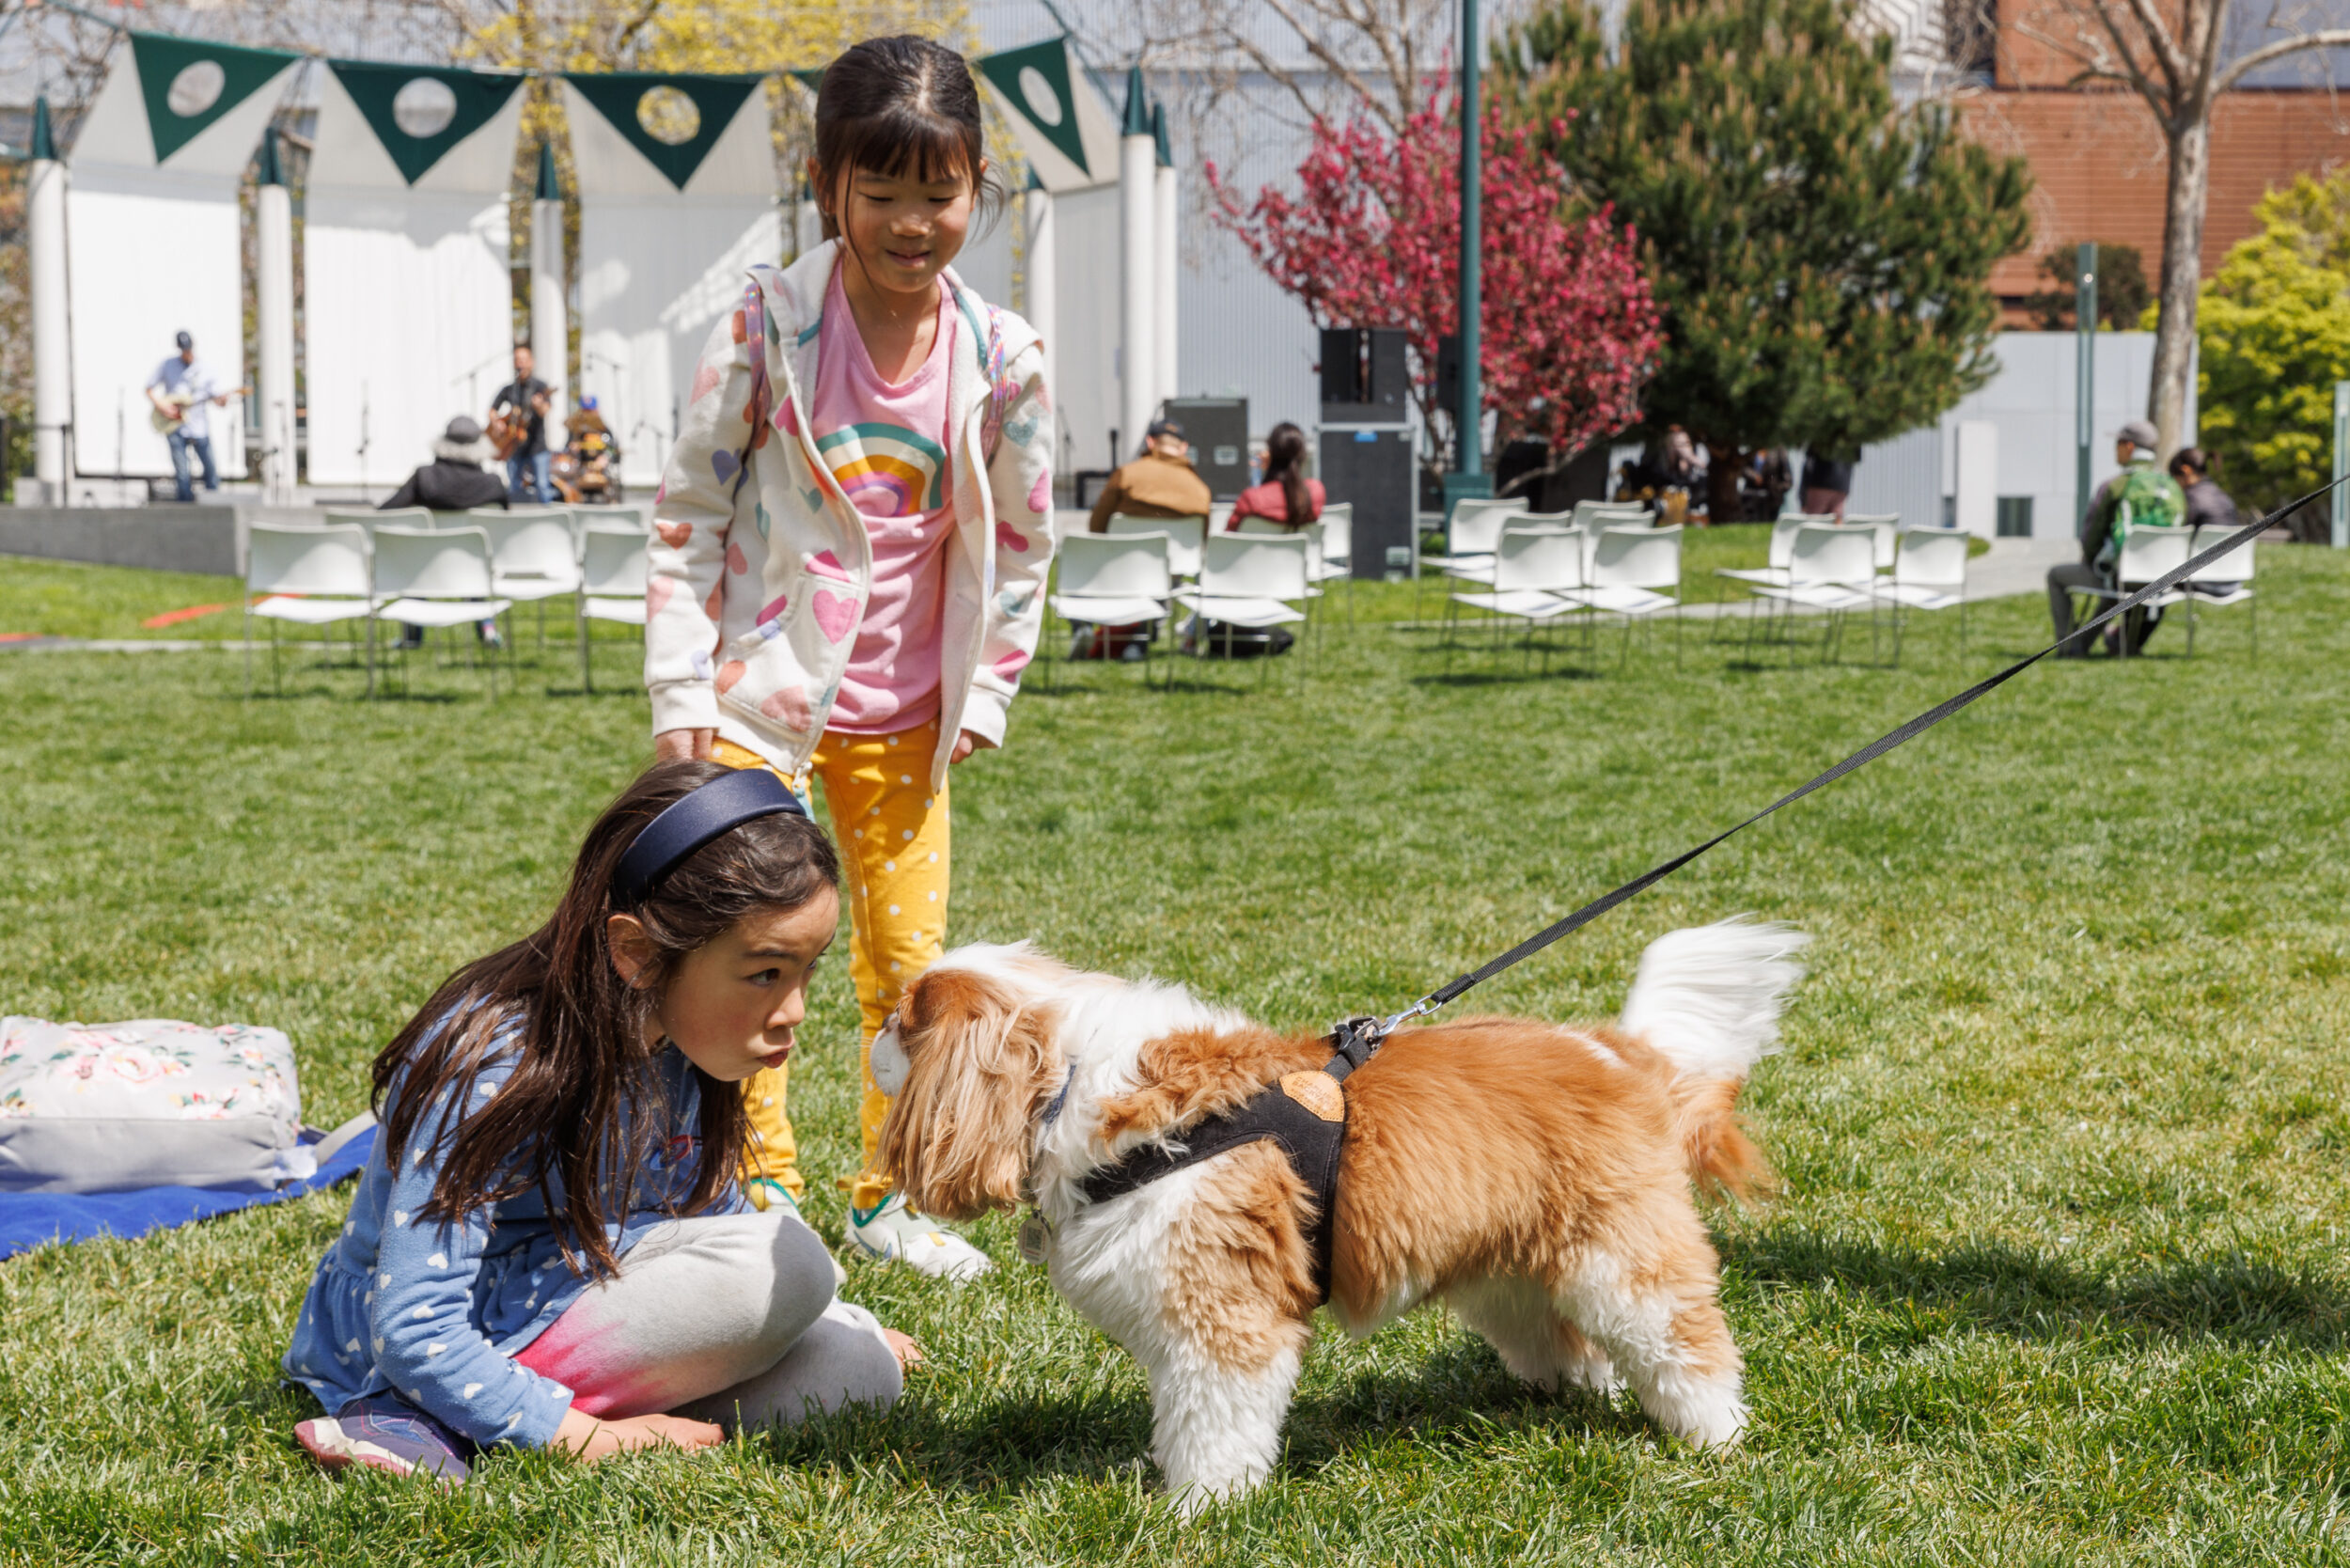 Two girls and a dog in a park with musicians playing in the background. One girl kneels by the dog, another stands smiling.